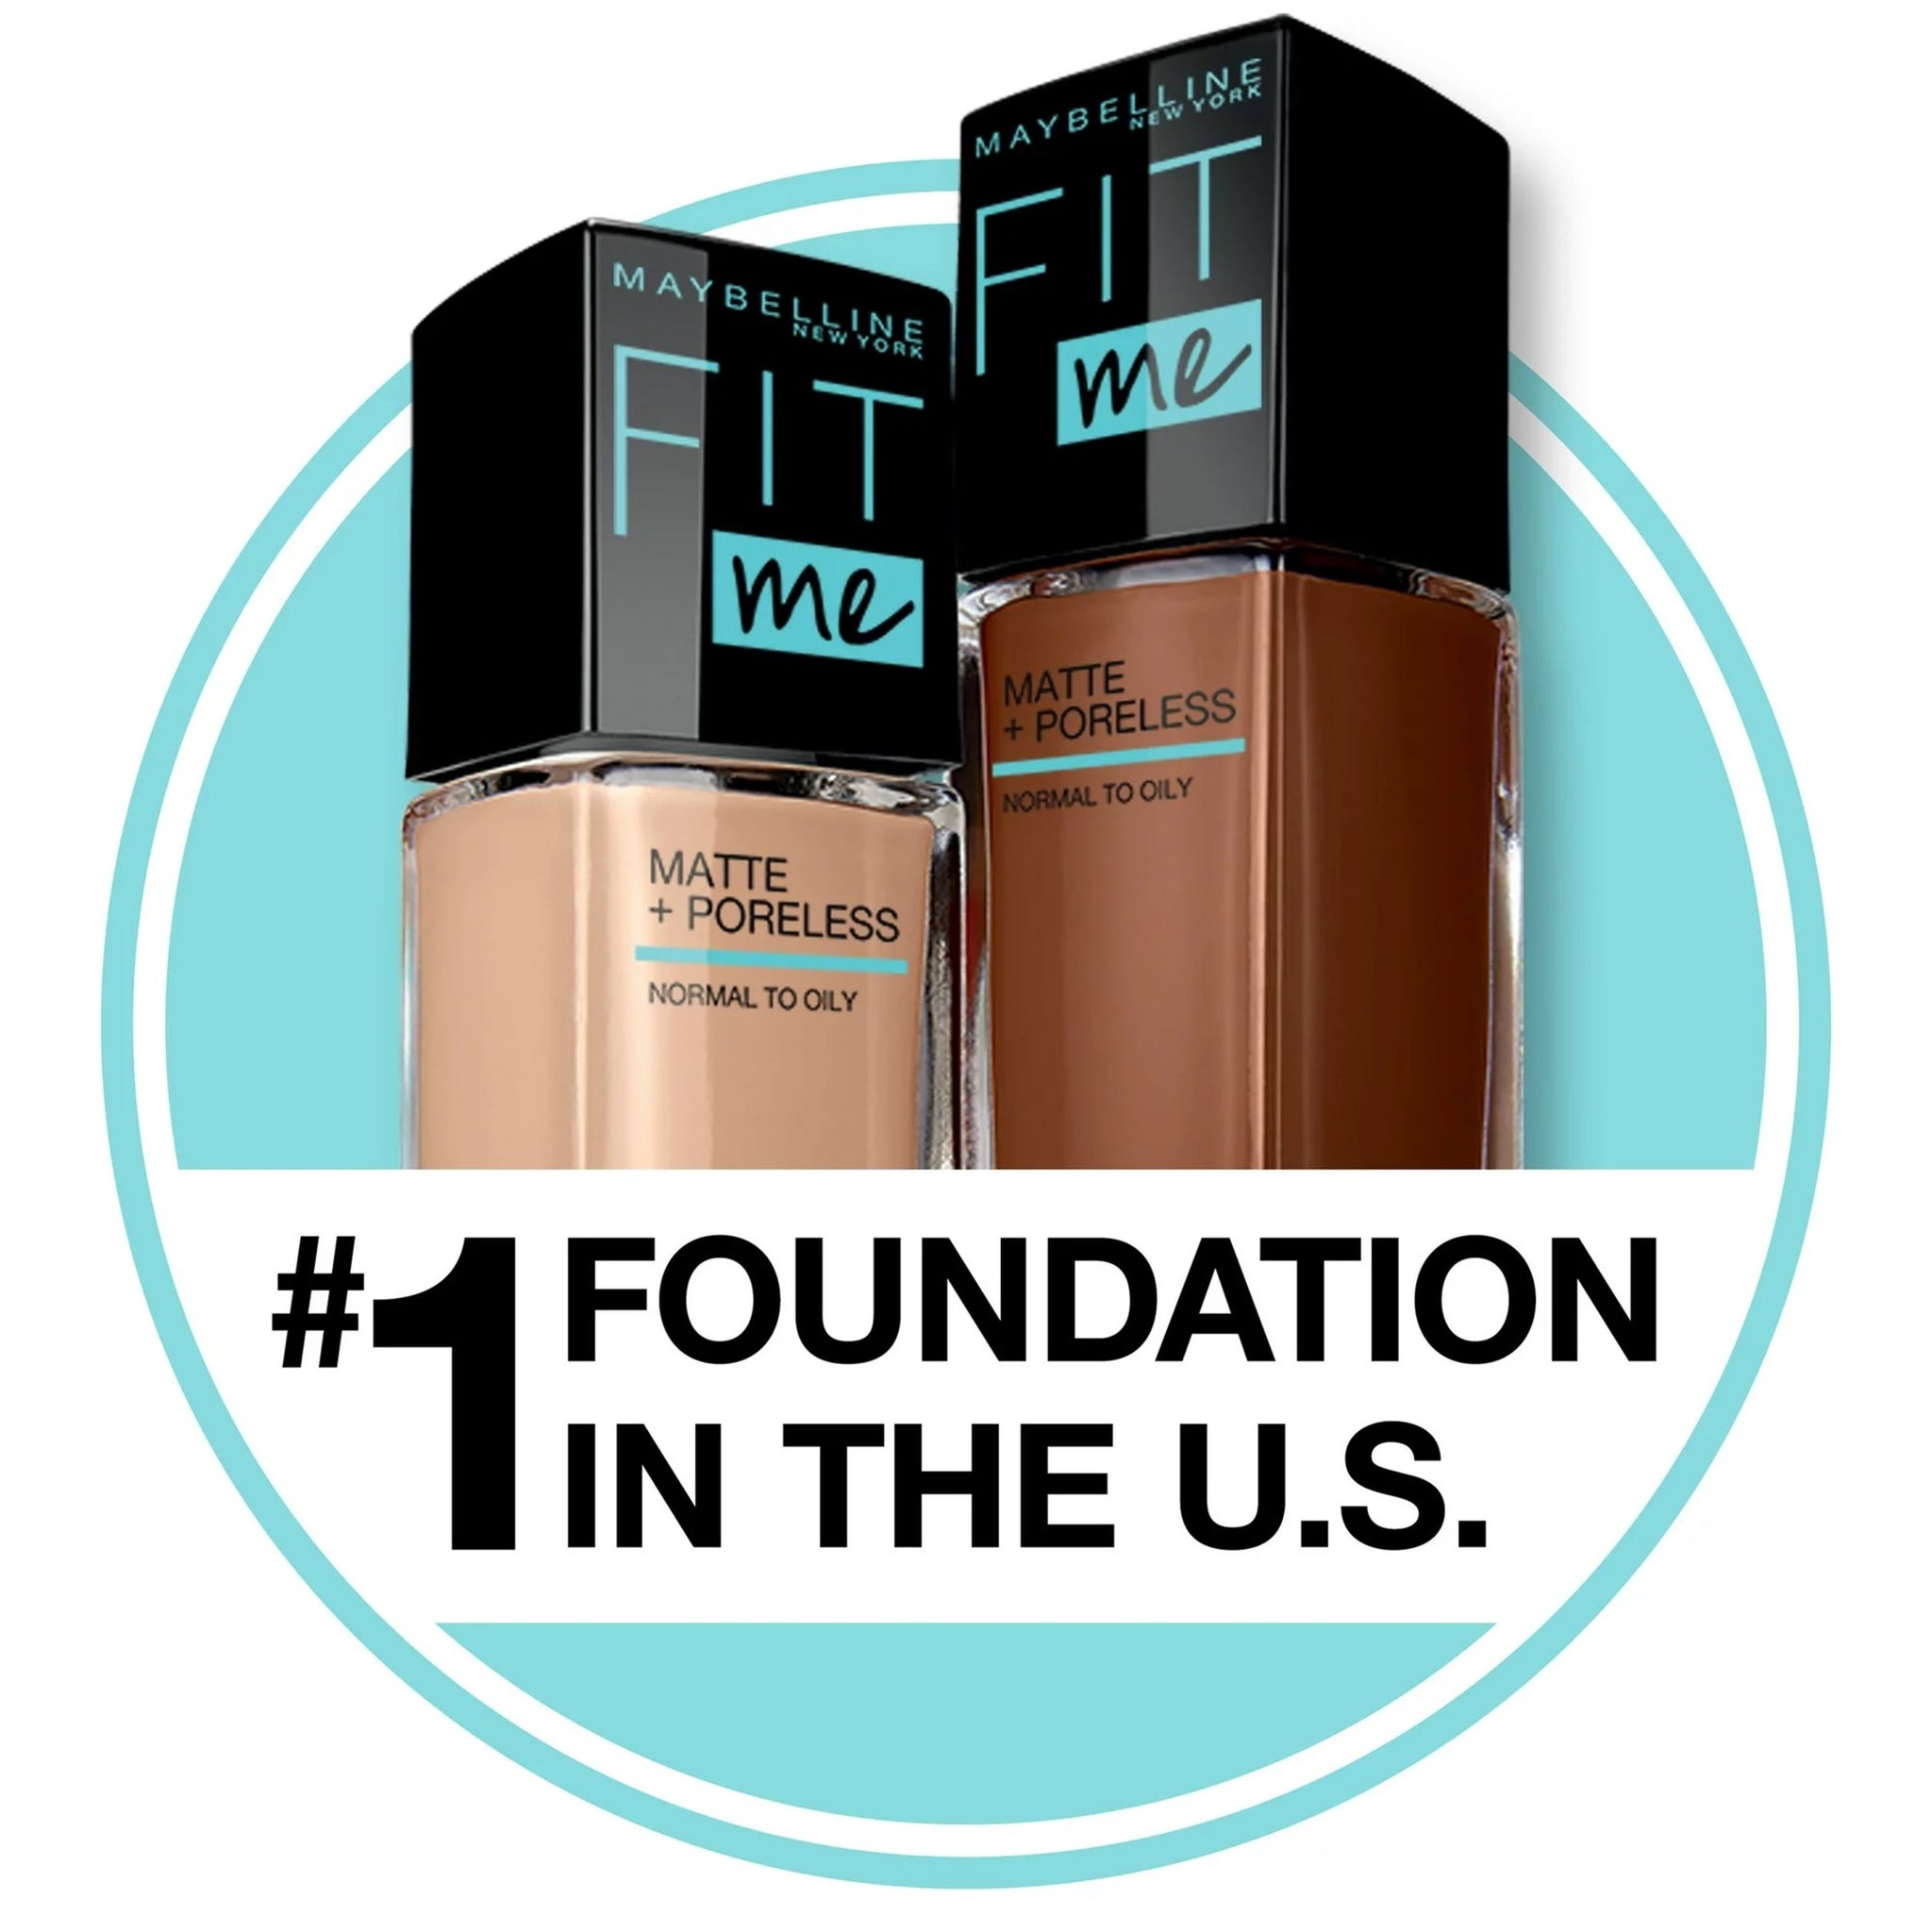 Maybelline Fit Me Foundation review: the budget base, rated